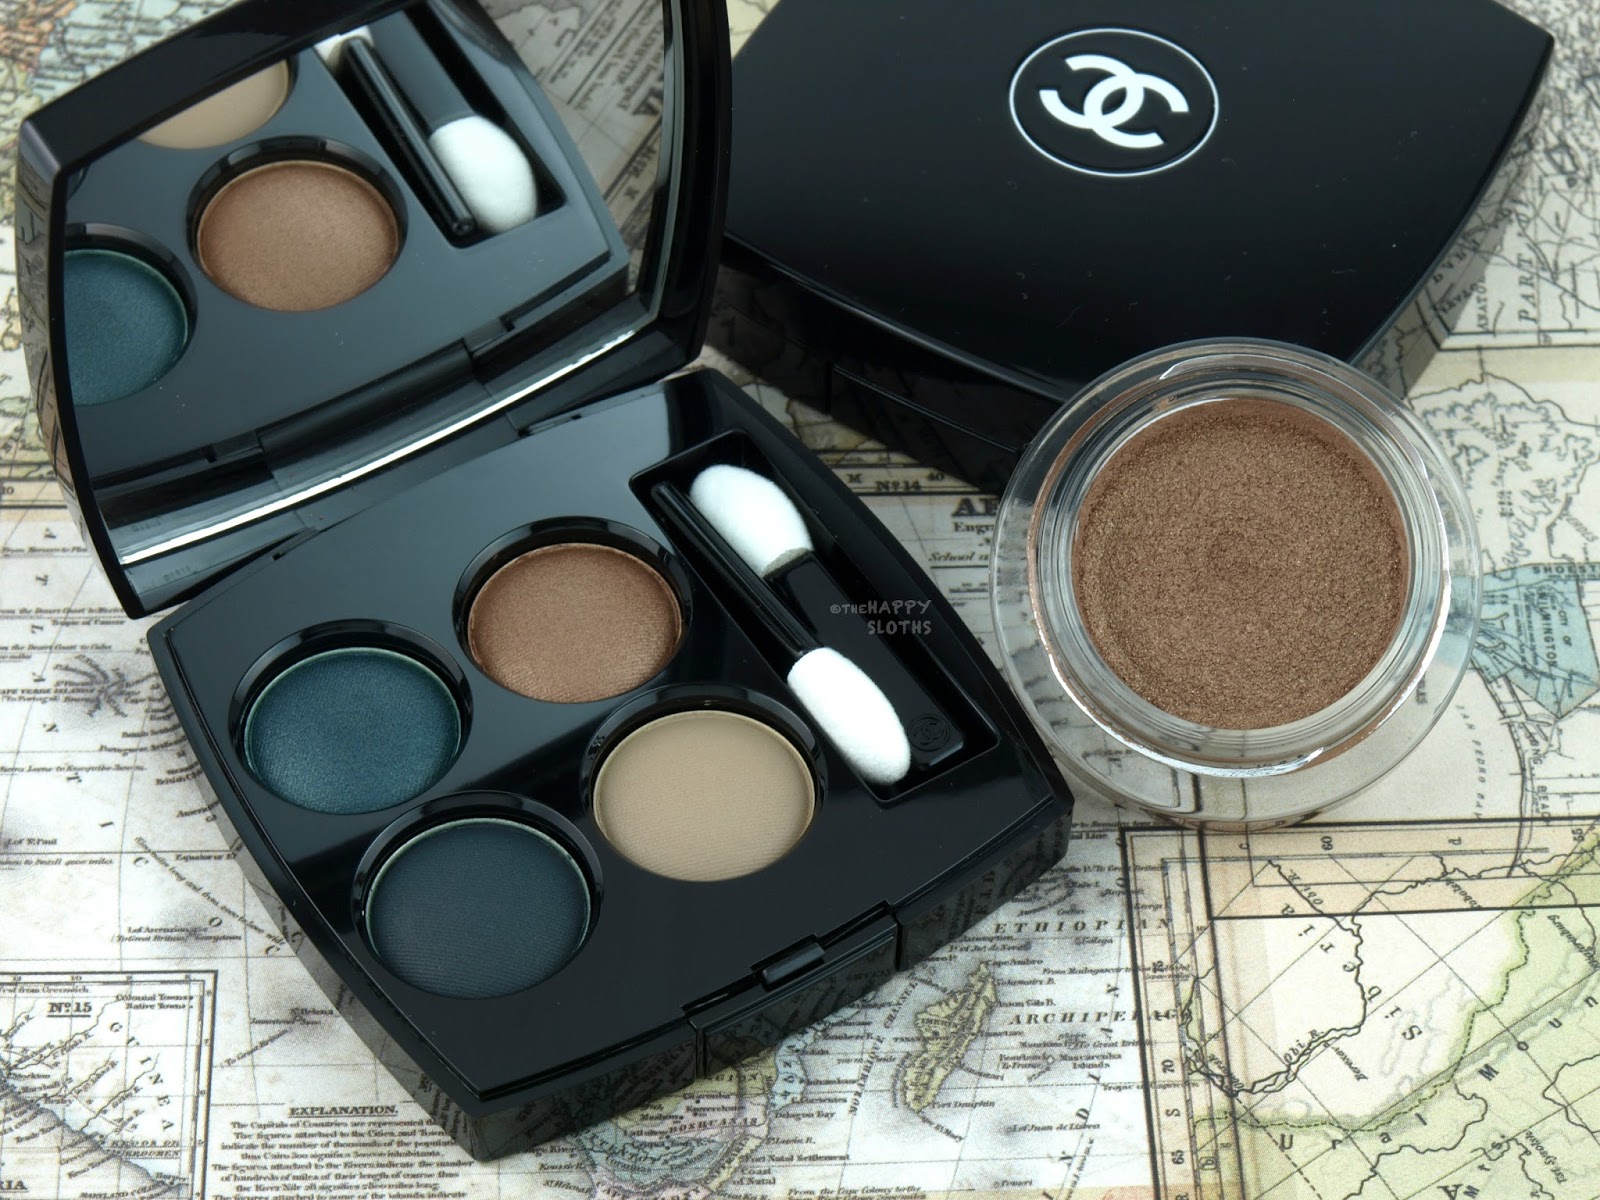 Chanel Fall 2017 Travel Diary Collection: Review and Swatches